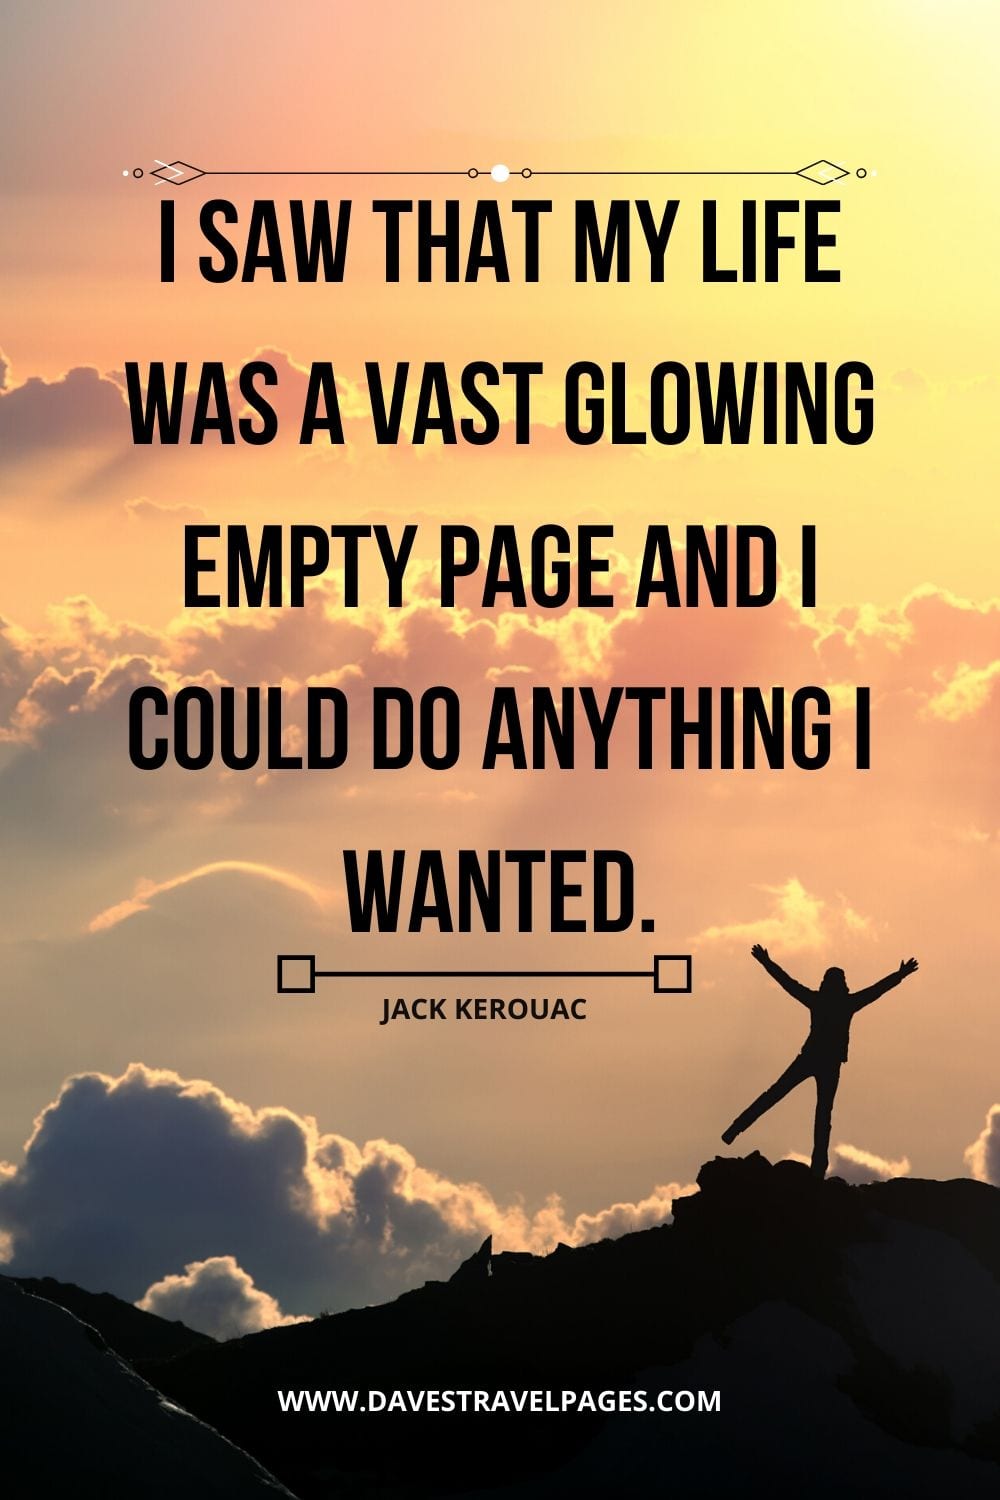 Jack Kerouac Quote: “I saw that my life was a vast glowing empty page and I could do anything I wanted.”